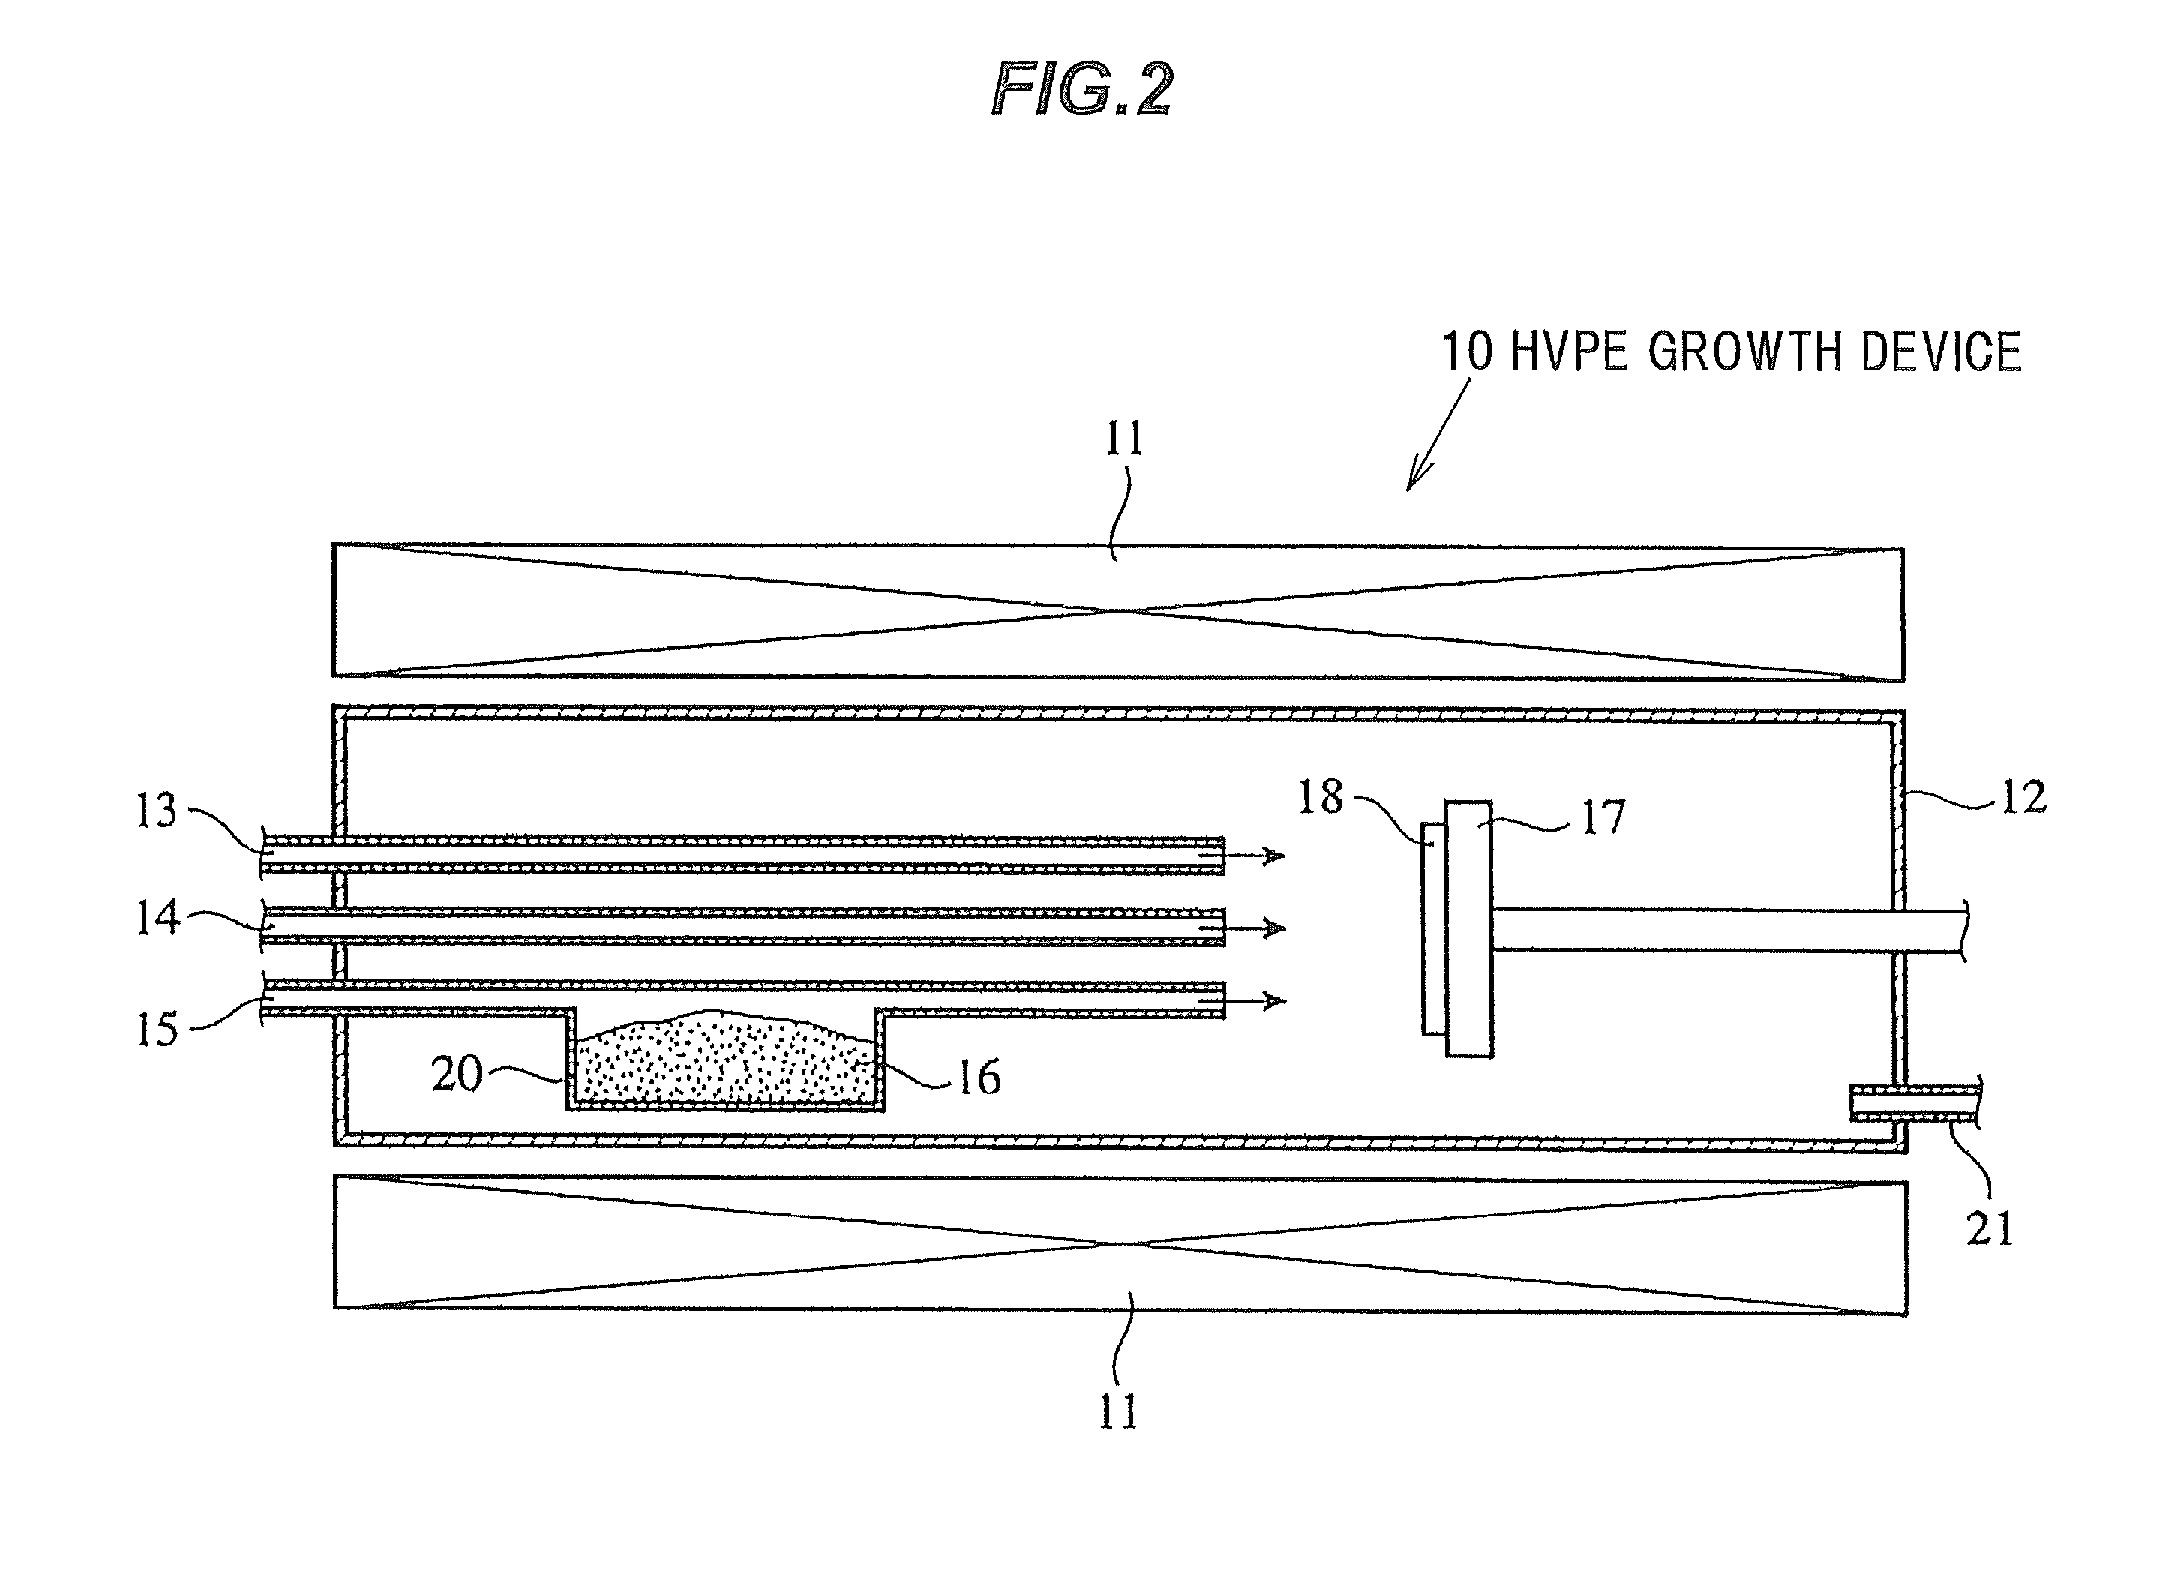 Gallium nitride substrate and epitaxial wafer